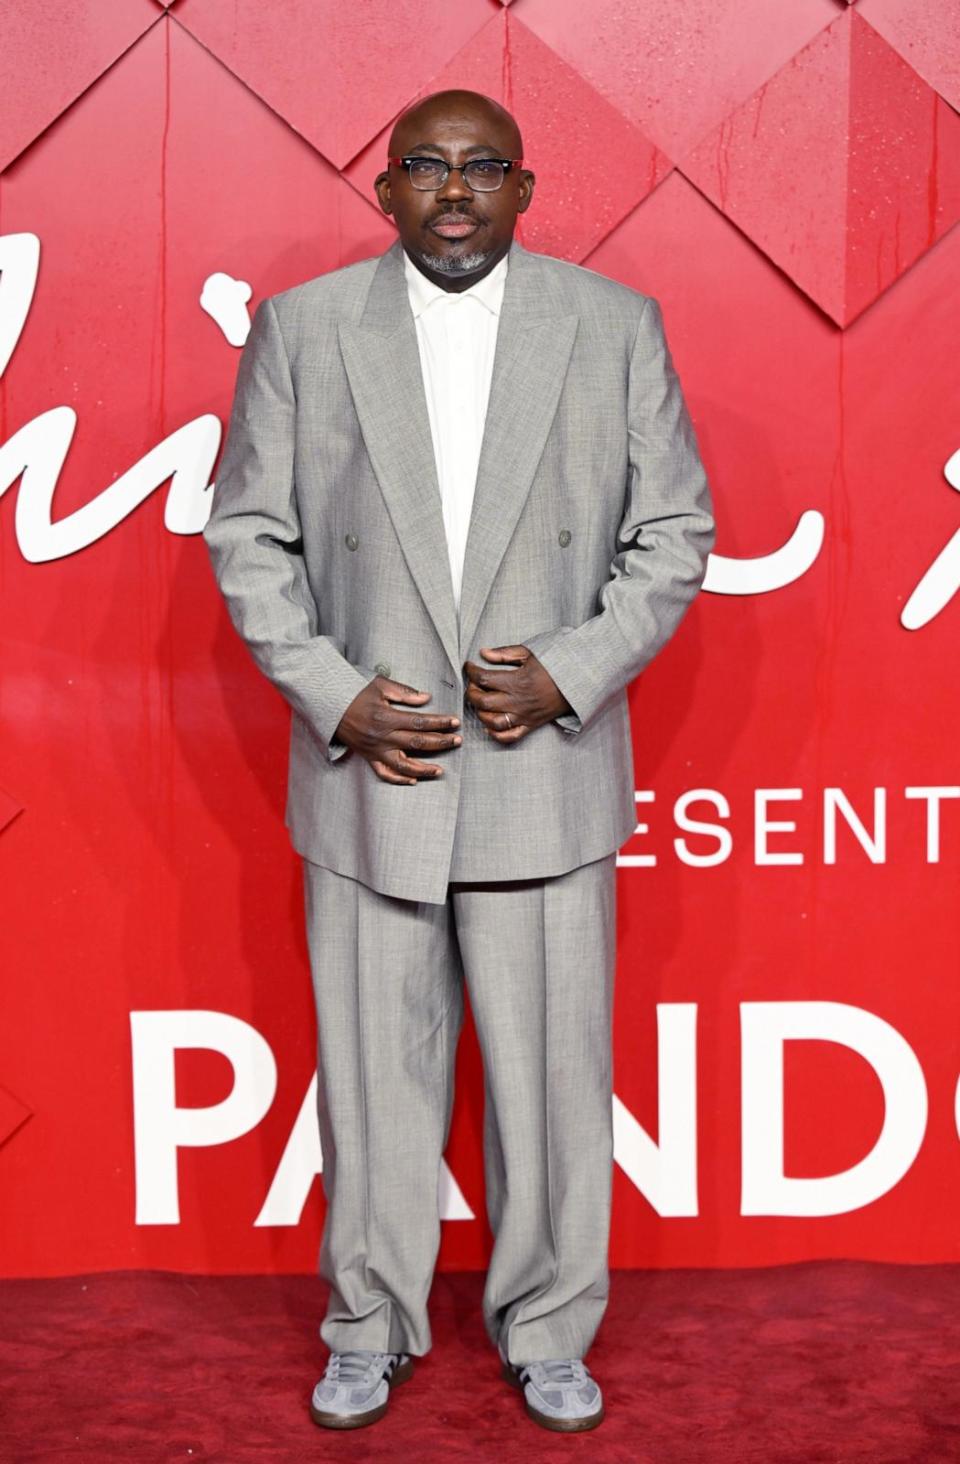 PHOTO: Edward Enninful attends The Fashion Awards 2023 Presented by Pandora at the Royal Albert Hall on Dec. 04, 2023 in London. (Karwai Tang/WireImage via Getty Images)